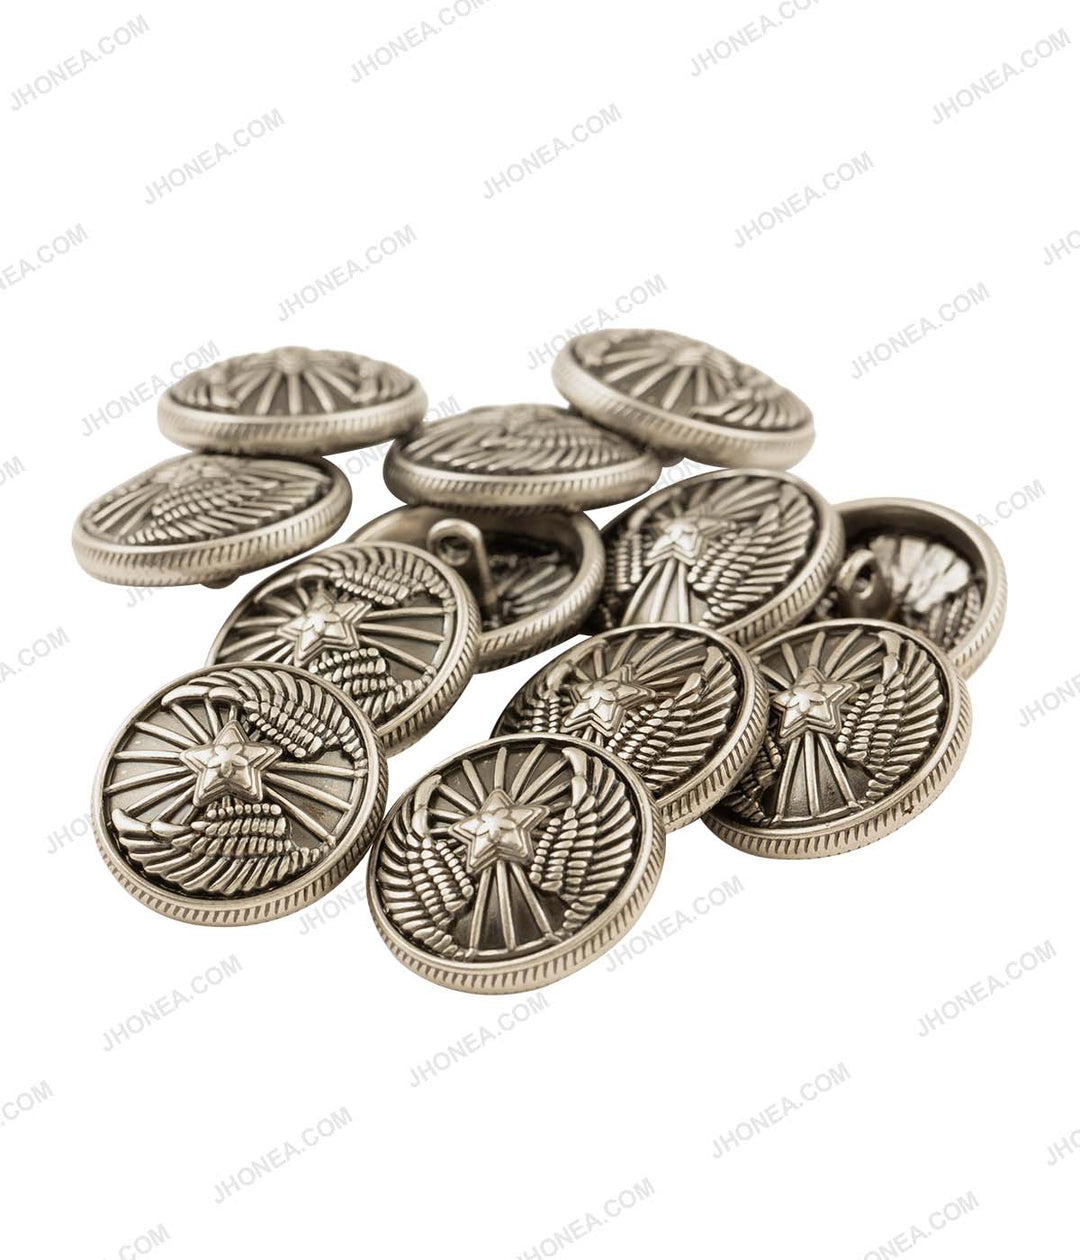 Premium Antique Vintage Winged Star Design Buttons for Jackets in Antique Silver Color